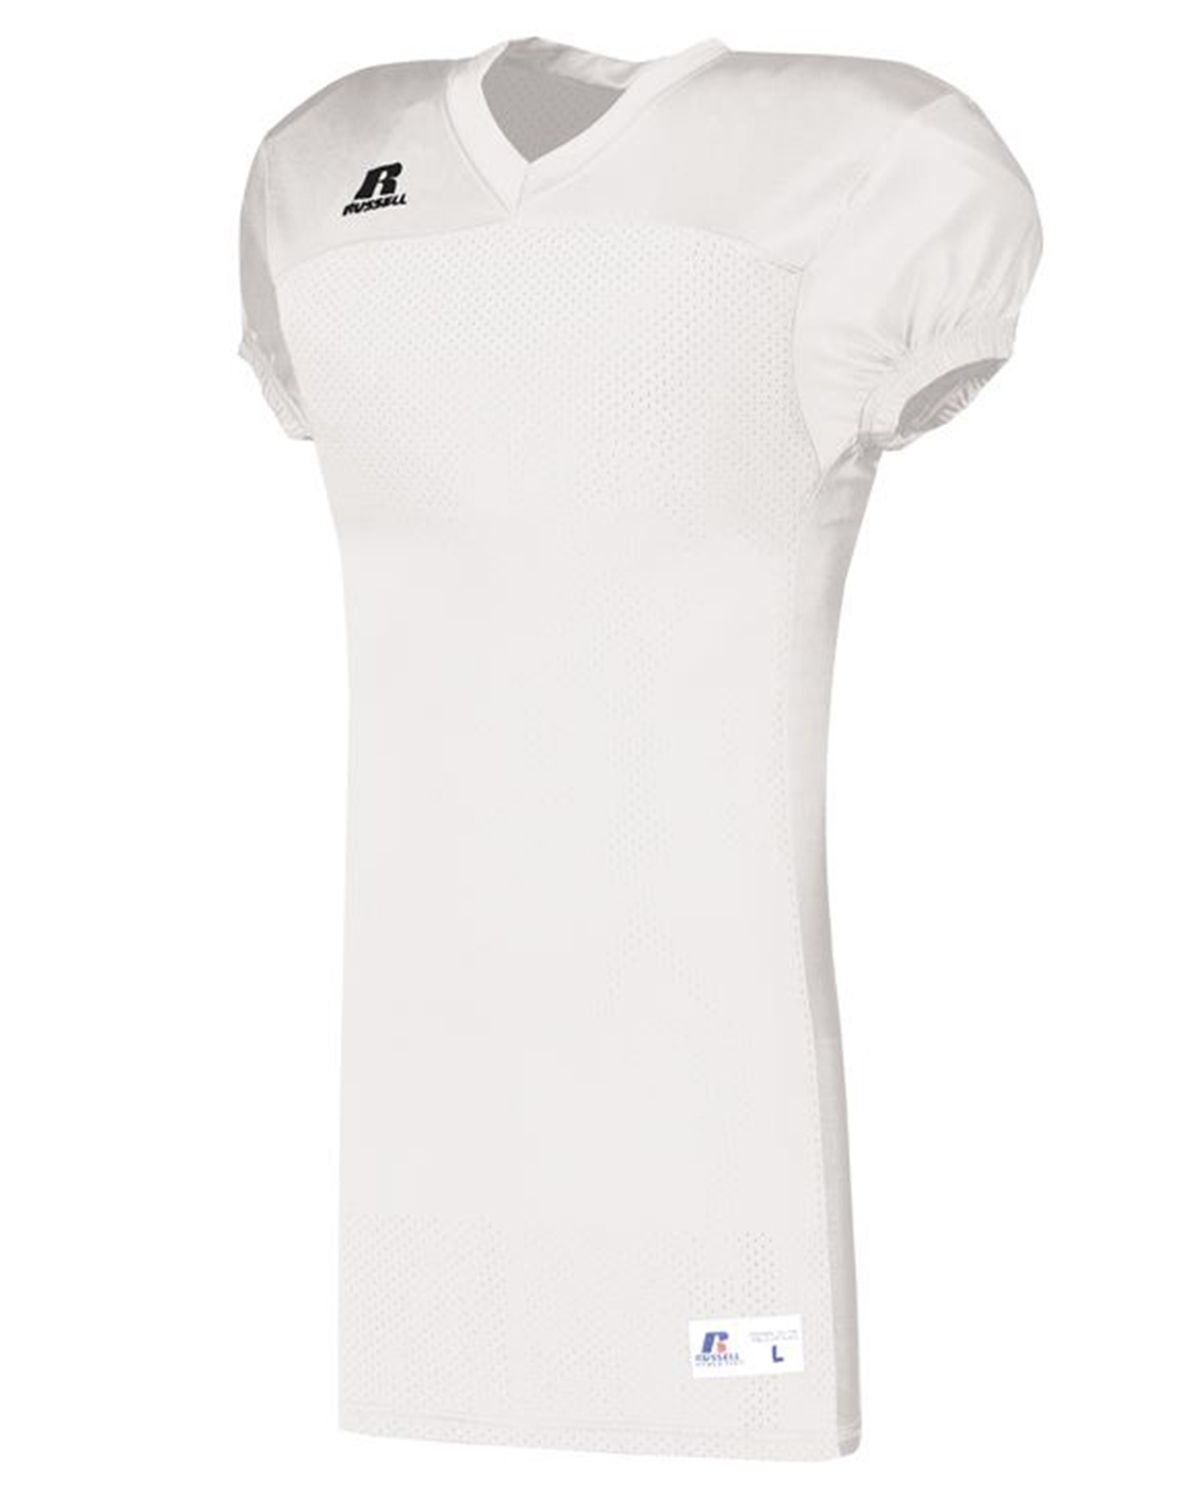 Russell Athletic Youth Practice Football Jersey 